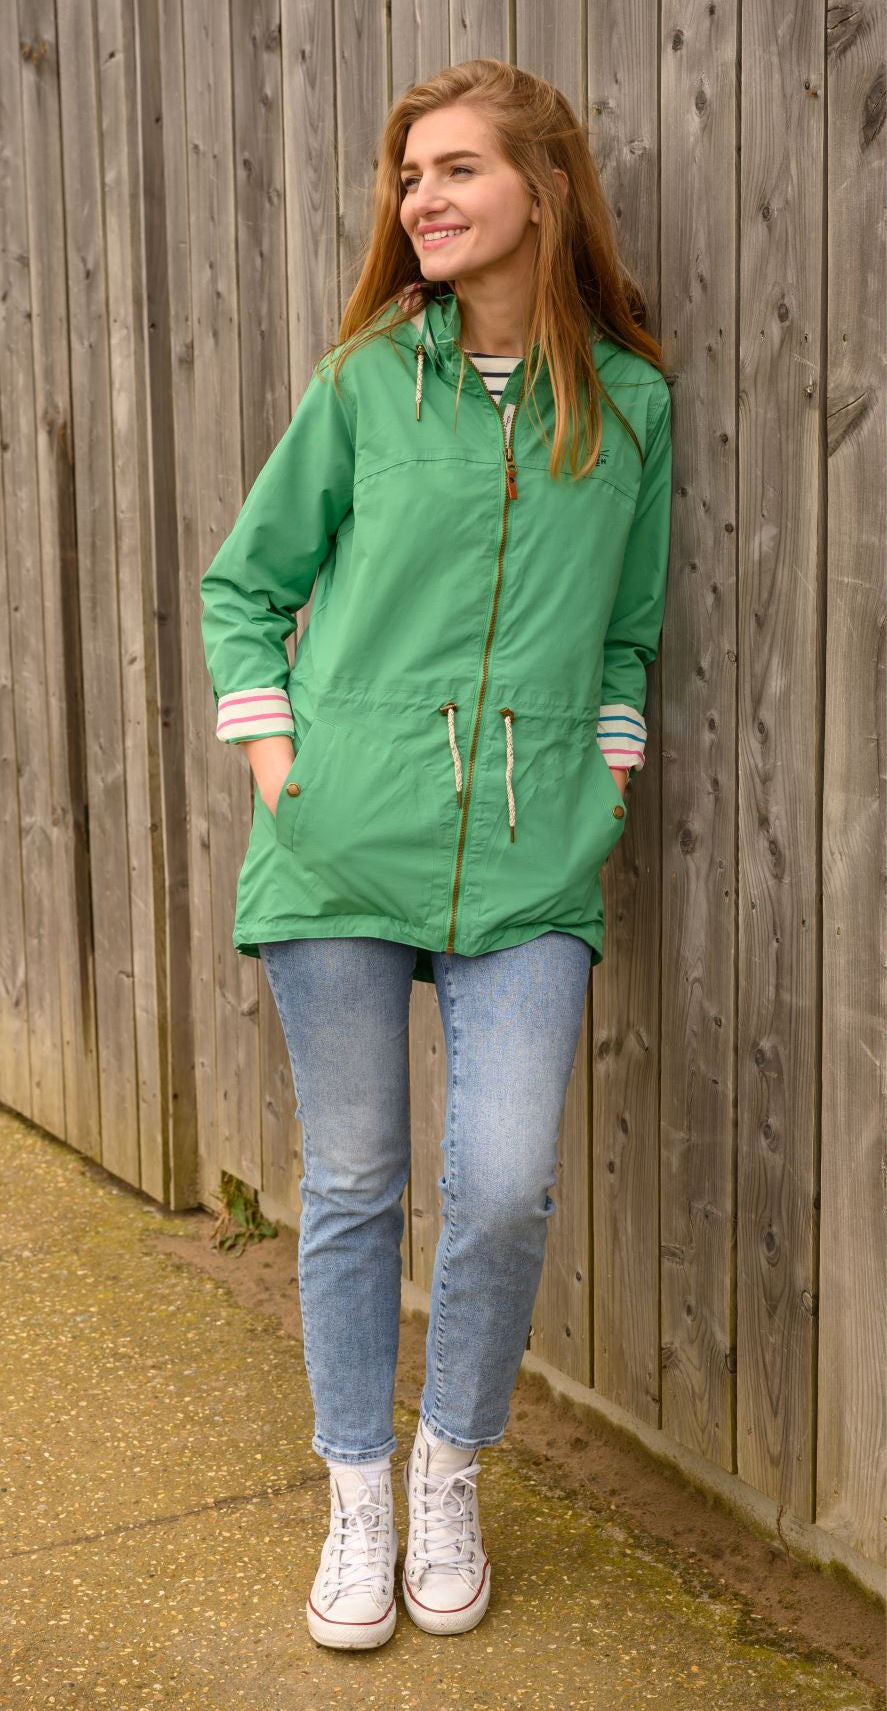 Lighthouse Womens 'Victoria' Waterproof Jacket - Seagrass Green